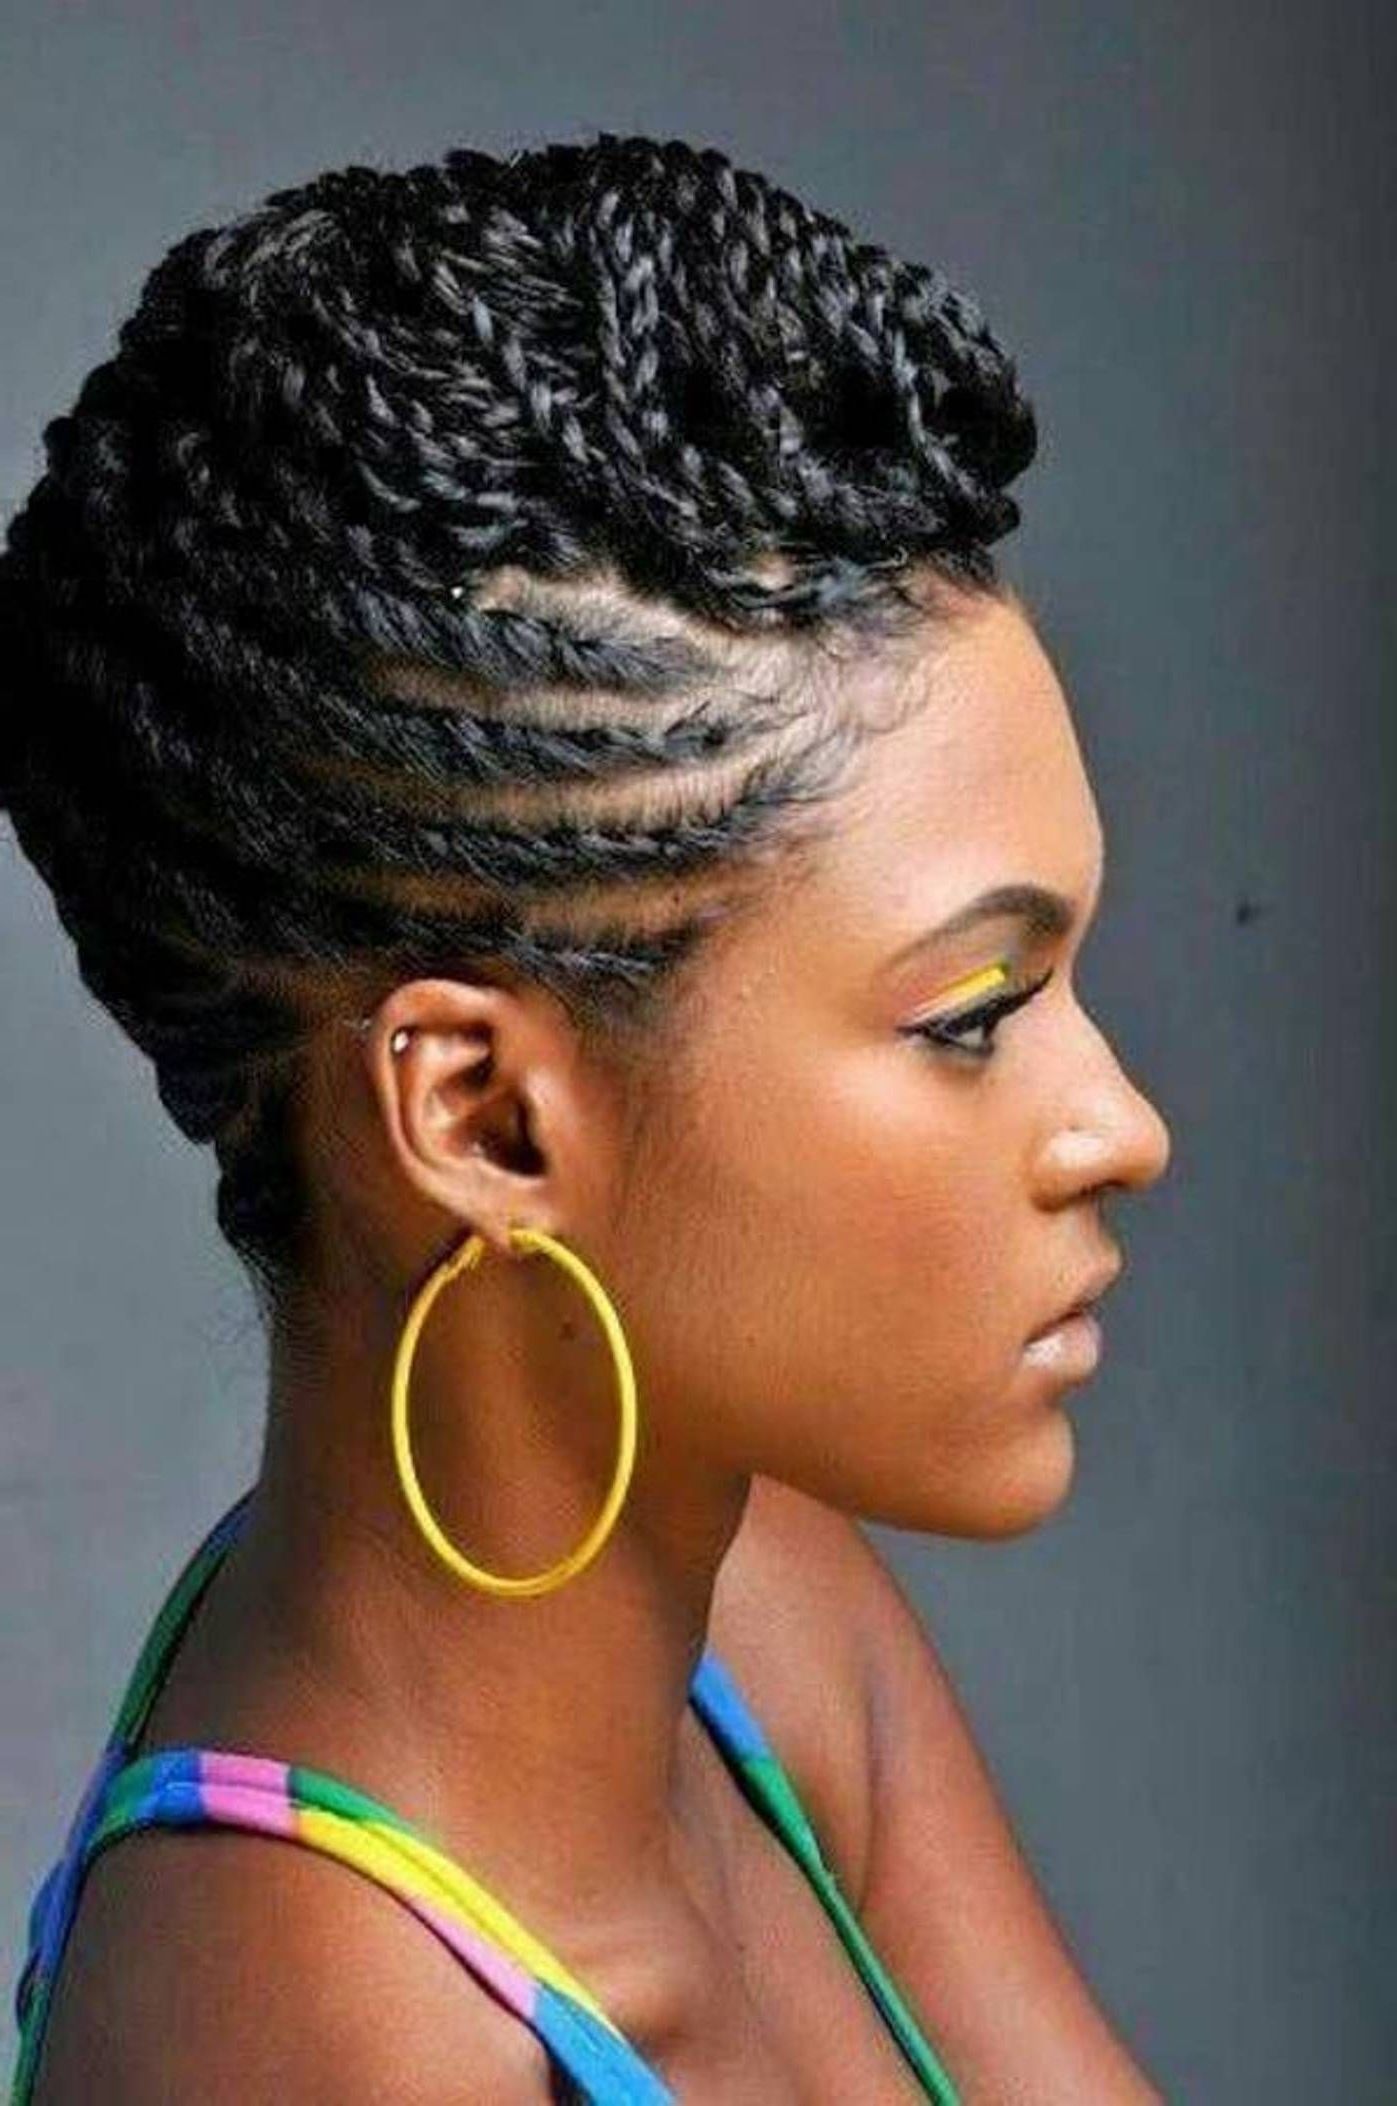 Best Updo Hairstyles For Black Women Flat Twist Picture Of For Natural Hair Updo Hairstyles (View 10 of 15)